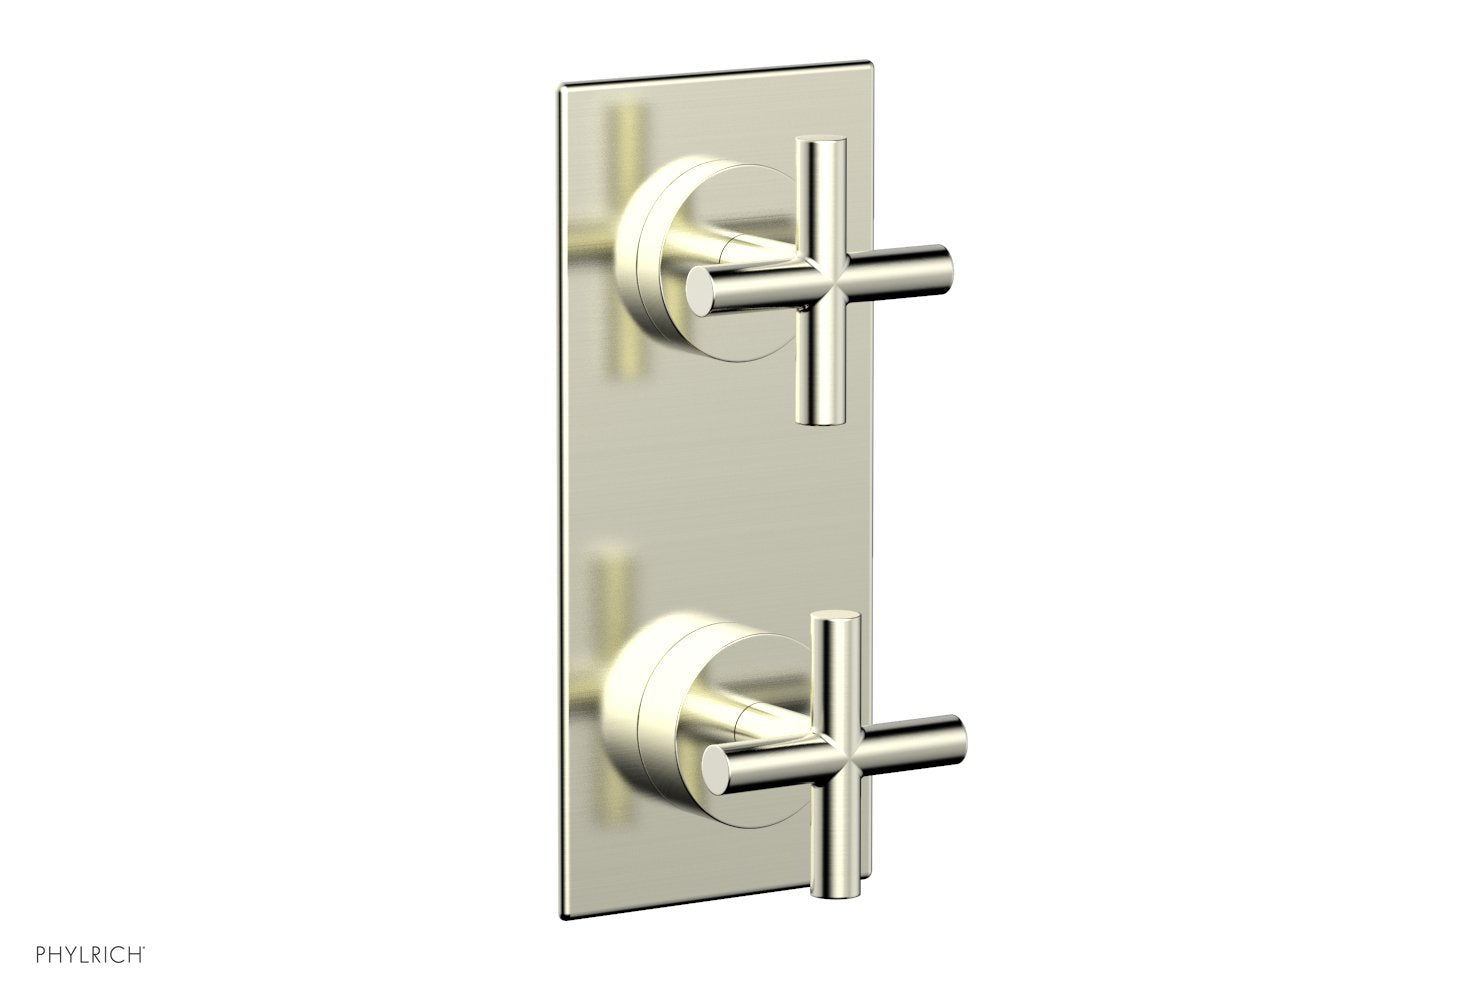 Phylrich TRANSITION 1/2" Thermostatic Valve with Volume Control or Diverter, Cross Handles